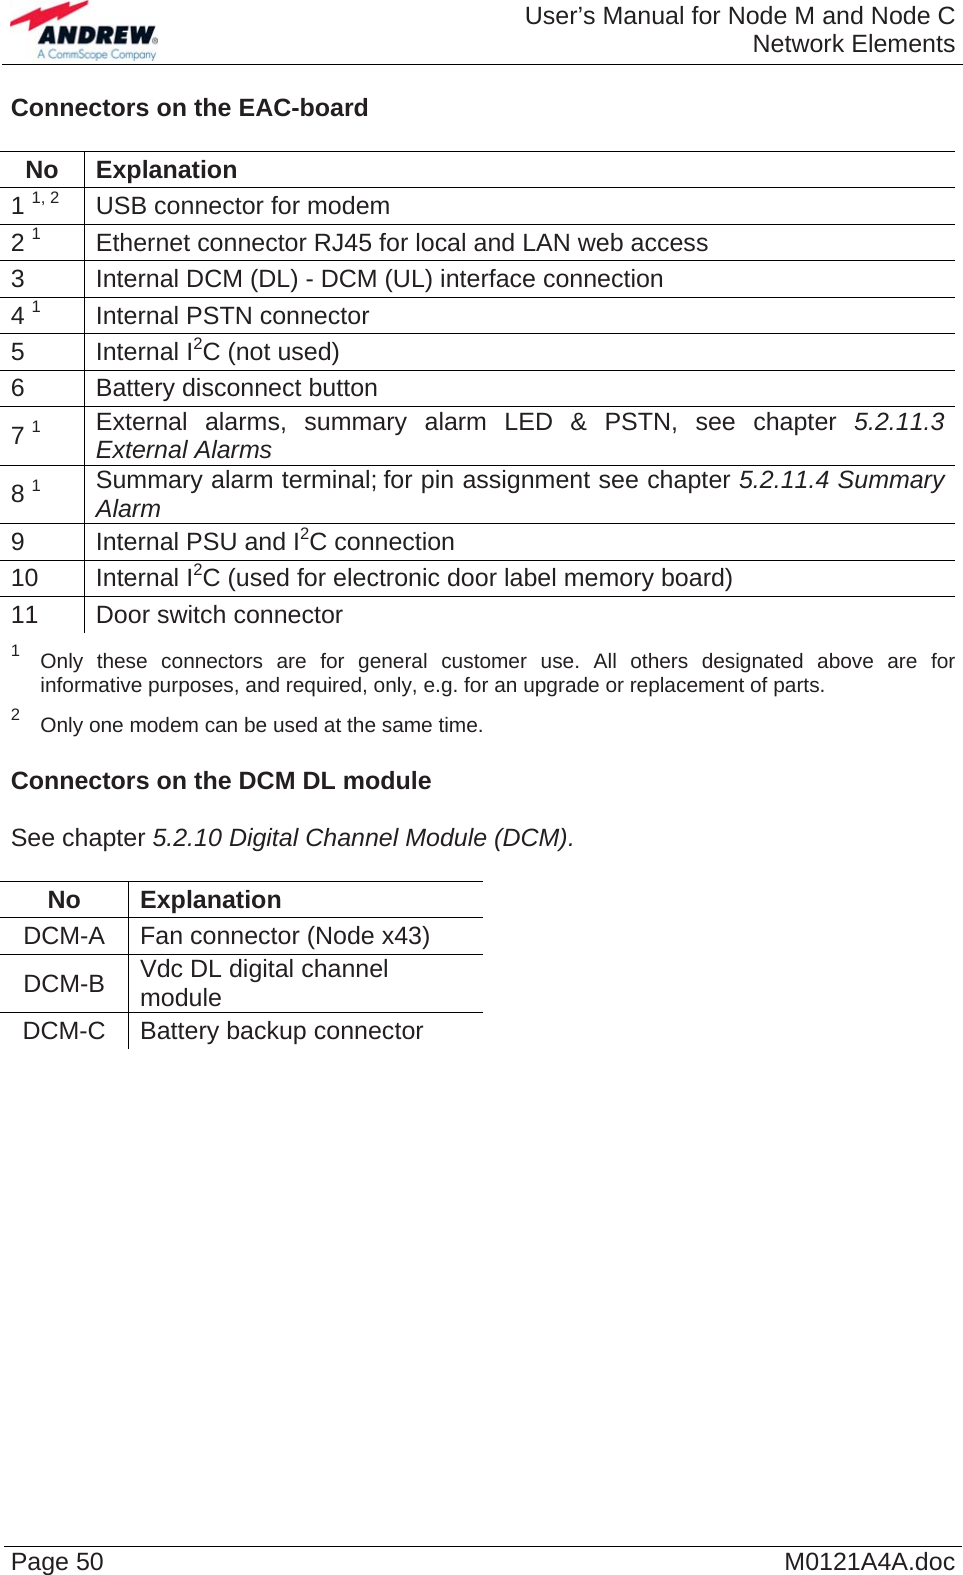  User’s Manual for Node M and Node CNetwork Elements Page 50  M0121A4A.doc Connectors on the EAC-board  No Explanation 1 1, 2  USB connector for modem 2 1  Ethernet connector RJ45 for local and LAN web access 3  Internal DCM (DL) - DCM (UL) interface connection 4 1  Internal PSTN connector 5 Internal I2C (not used) 6  Battery disconnect button 7 1 External alarms, summary alarm LED &amp; PSTN, see chapter 5.2.11.3 External Alarms 8 1 Summary alarm terminal; for pin assignment see chapter 5.2.11.4 Summary Alarm 9  Internal PSU and I2C connection 10 Internal I2C (used for electronic door label memory board) 11  Door switch connector 1 Only these connectors are for general customer use. All others designated above are for informative purposes, and required, only, e.g. for an upgrade or replacement of parts. 2 Only one modem can be used at the same time.  Connectors on the DCM DL module  See chapter 5.2.10 Digital Channel Module (DCM).  No Explanation DCM-A  Fan connector (Node x43) DCM-B  Vdc DL digital channel module DCM-C  Battery backup connector  